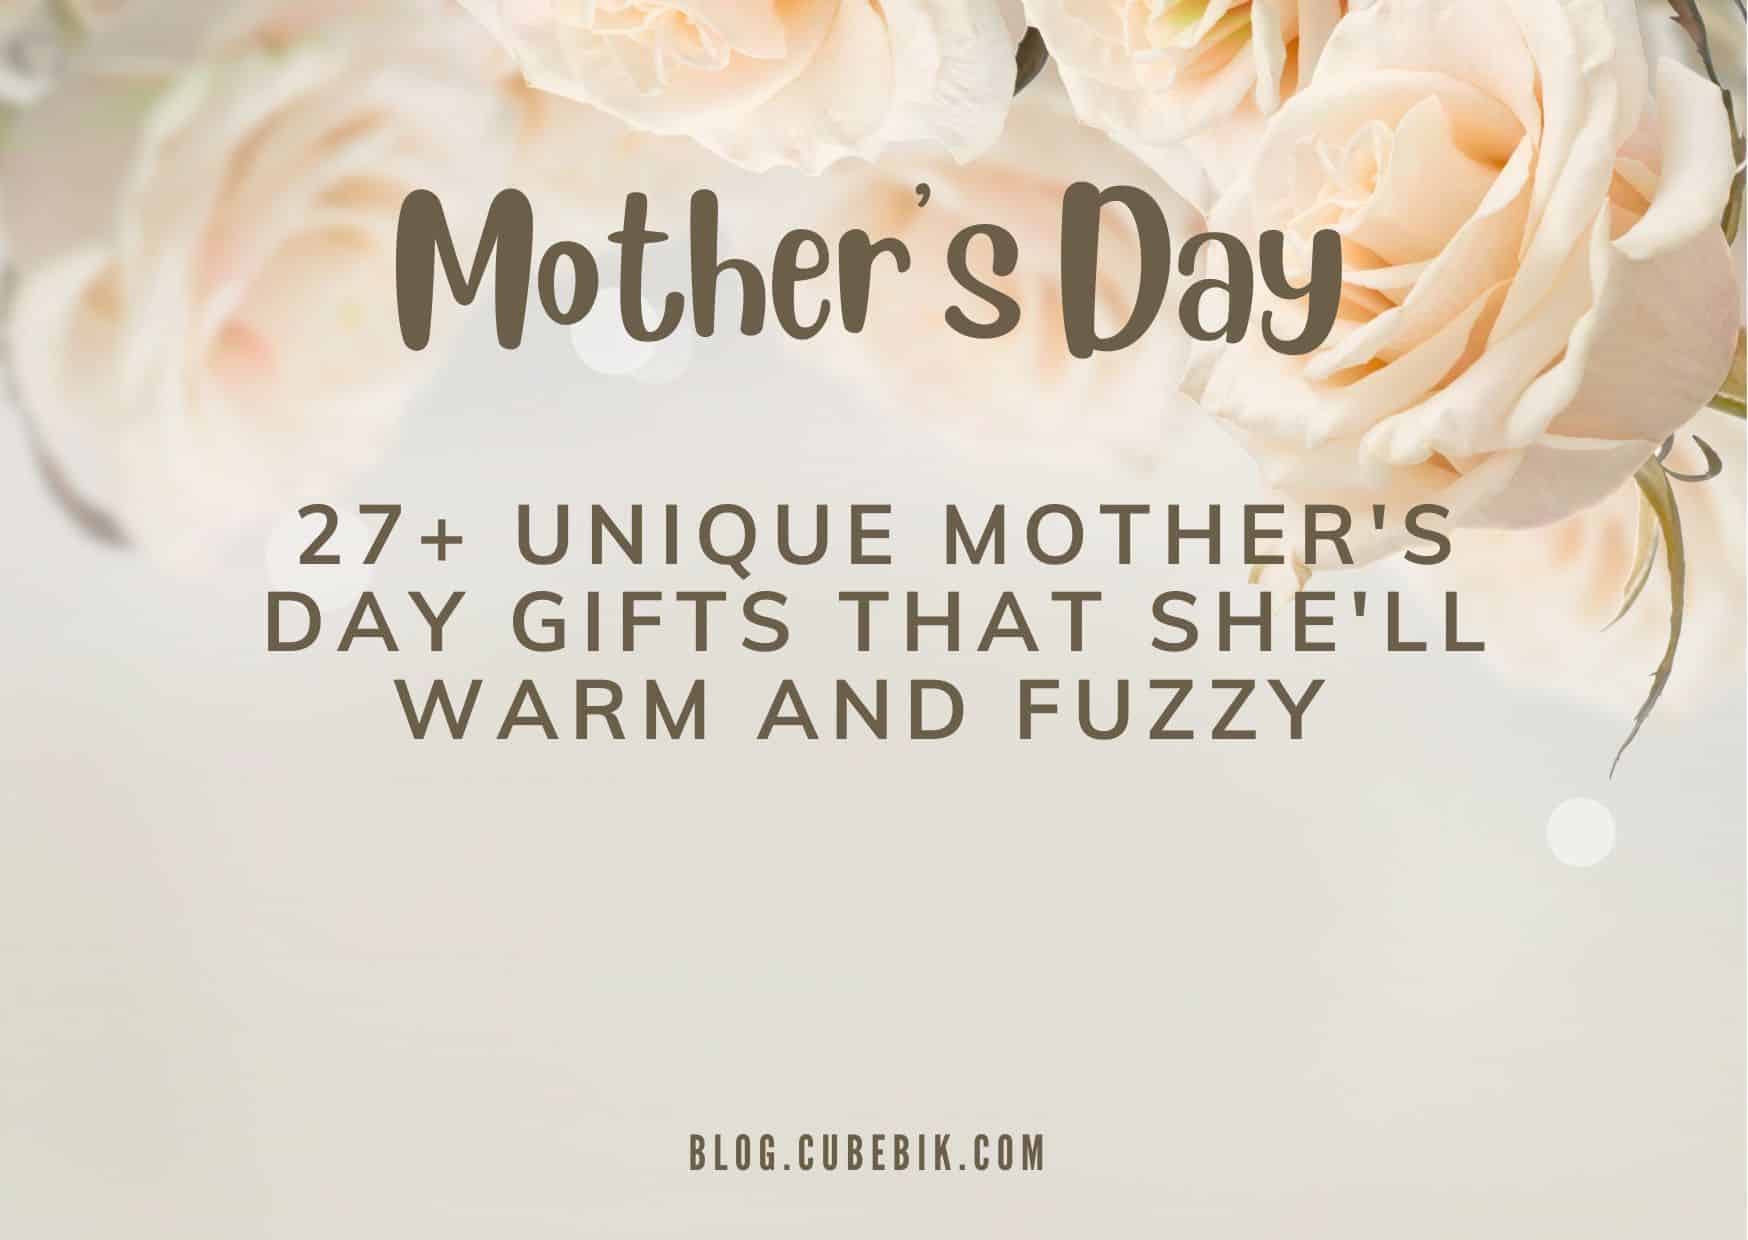 27 Unique Mothers Day Gifts That Shell Warm And Fuzzy 1 - Mother'S Day Gifts | Cubebik Blog